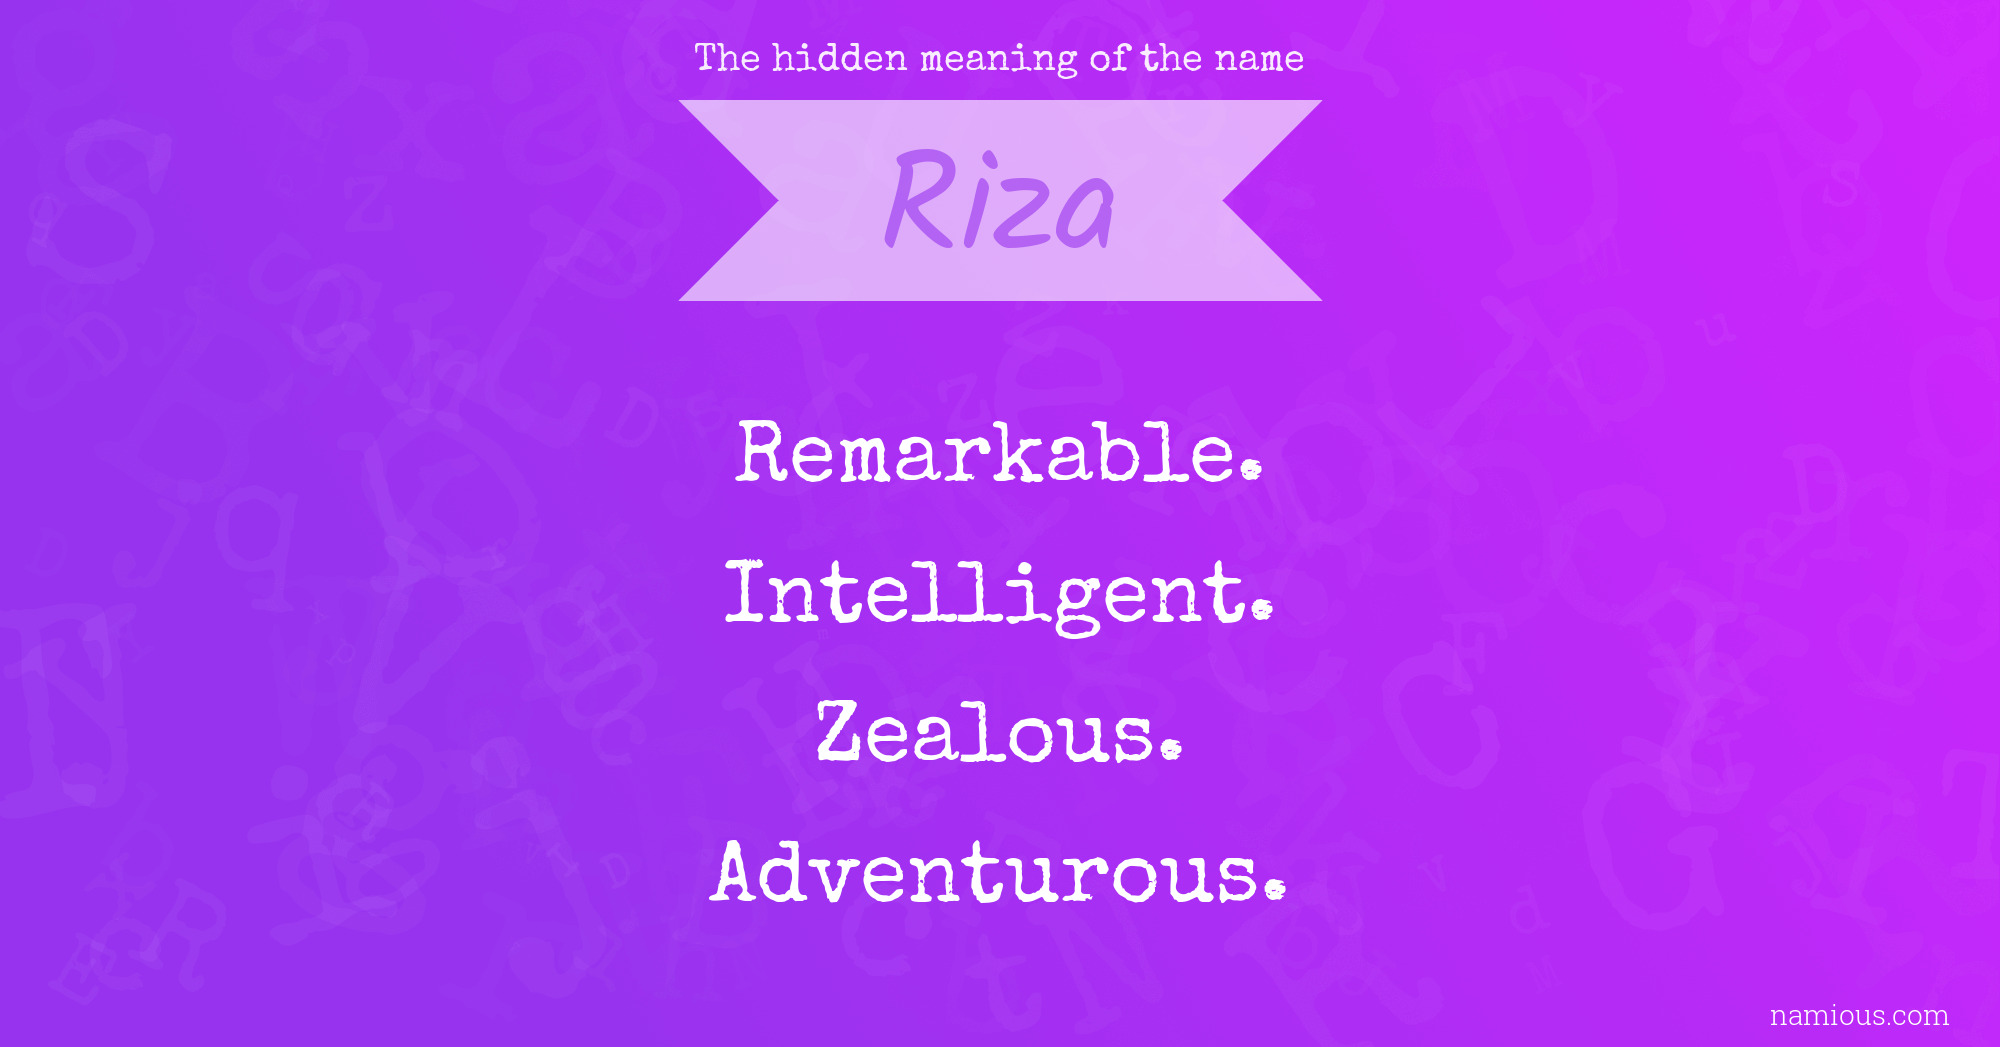 The hidden meaning of the name Riza | Namious